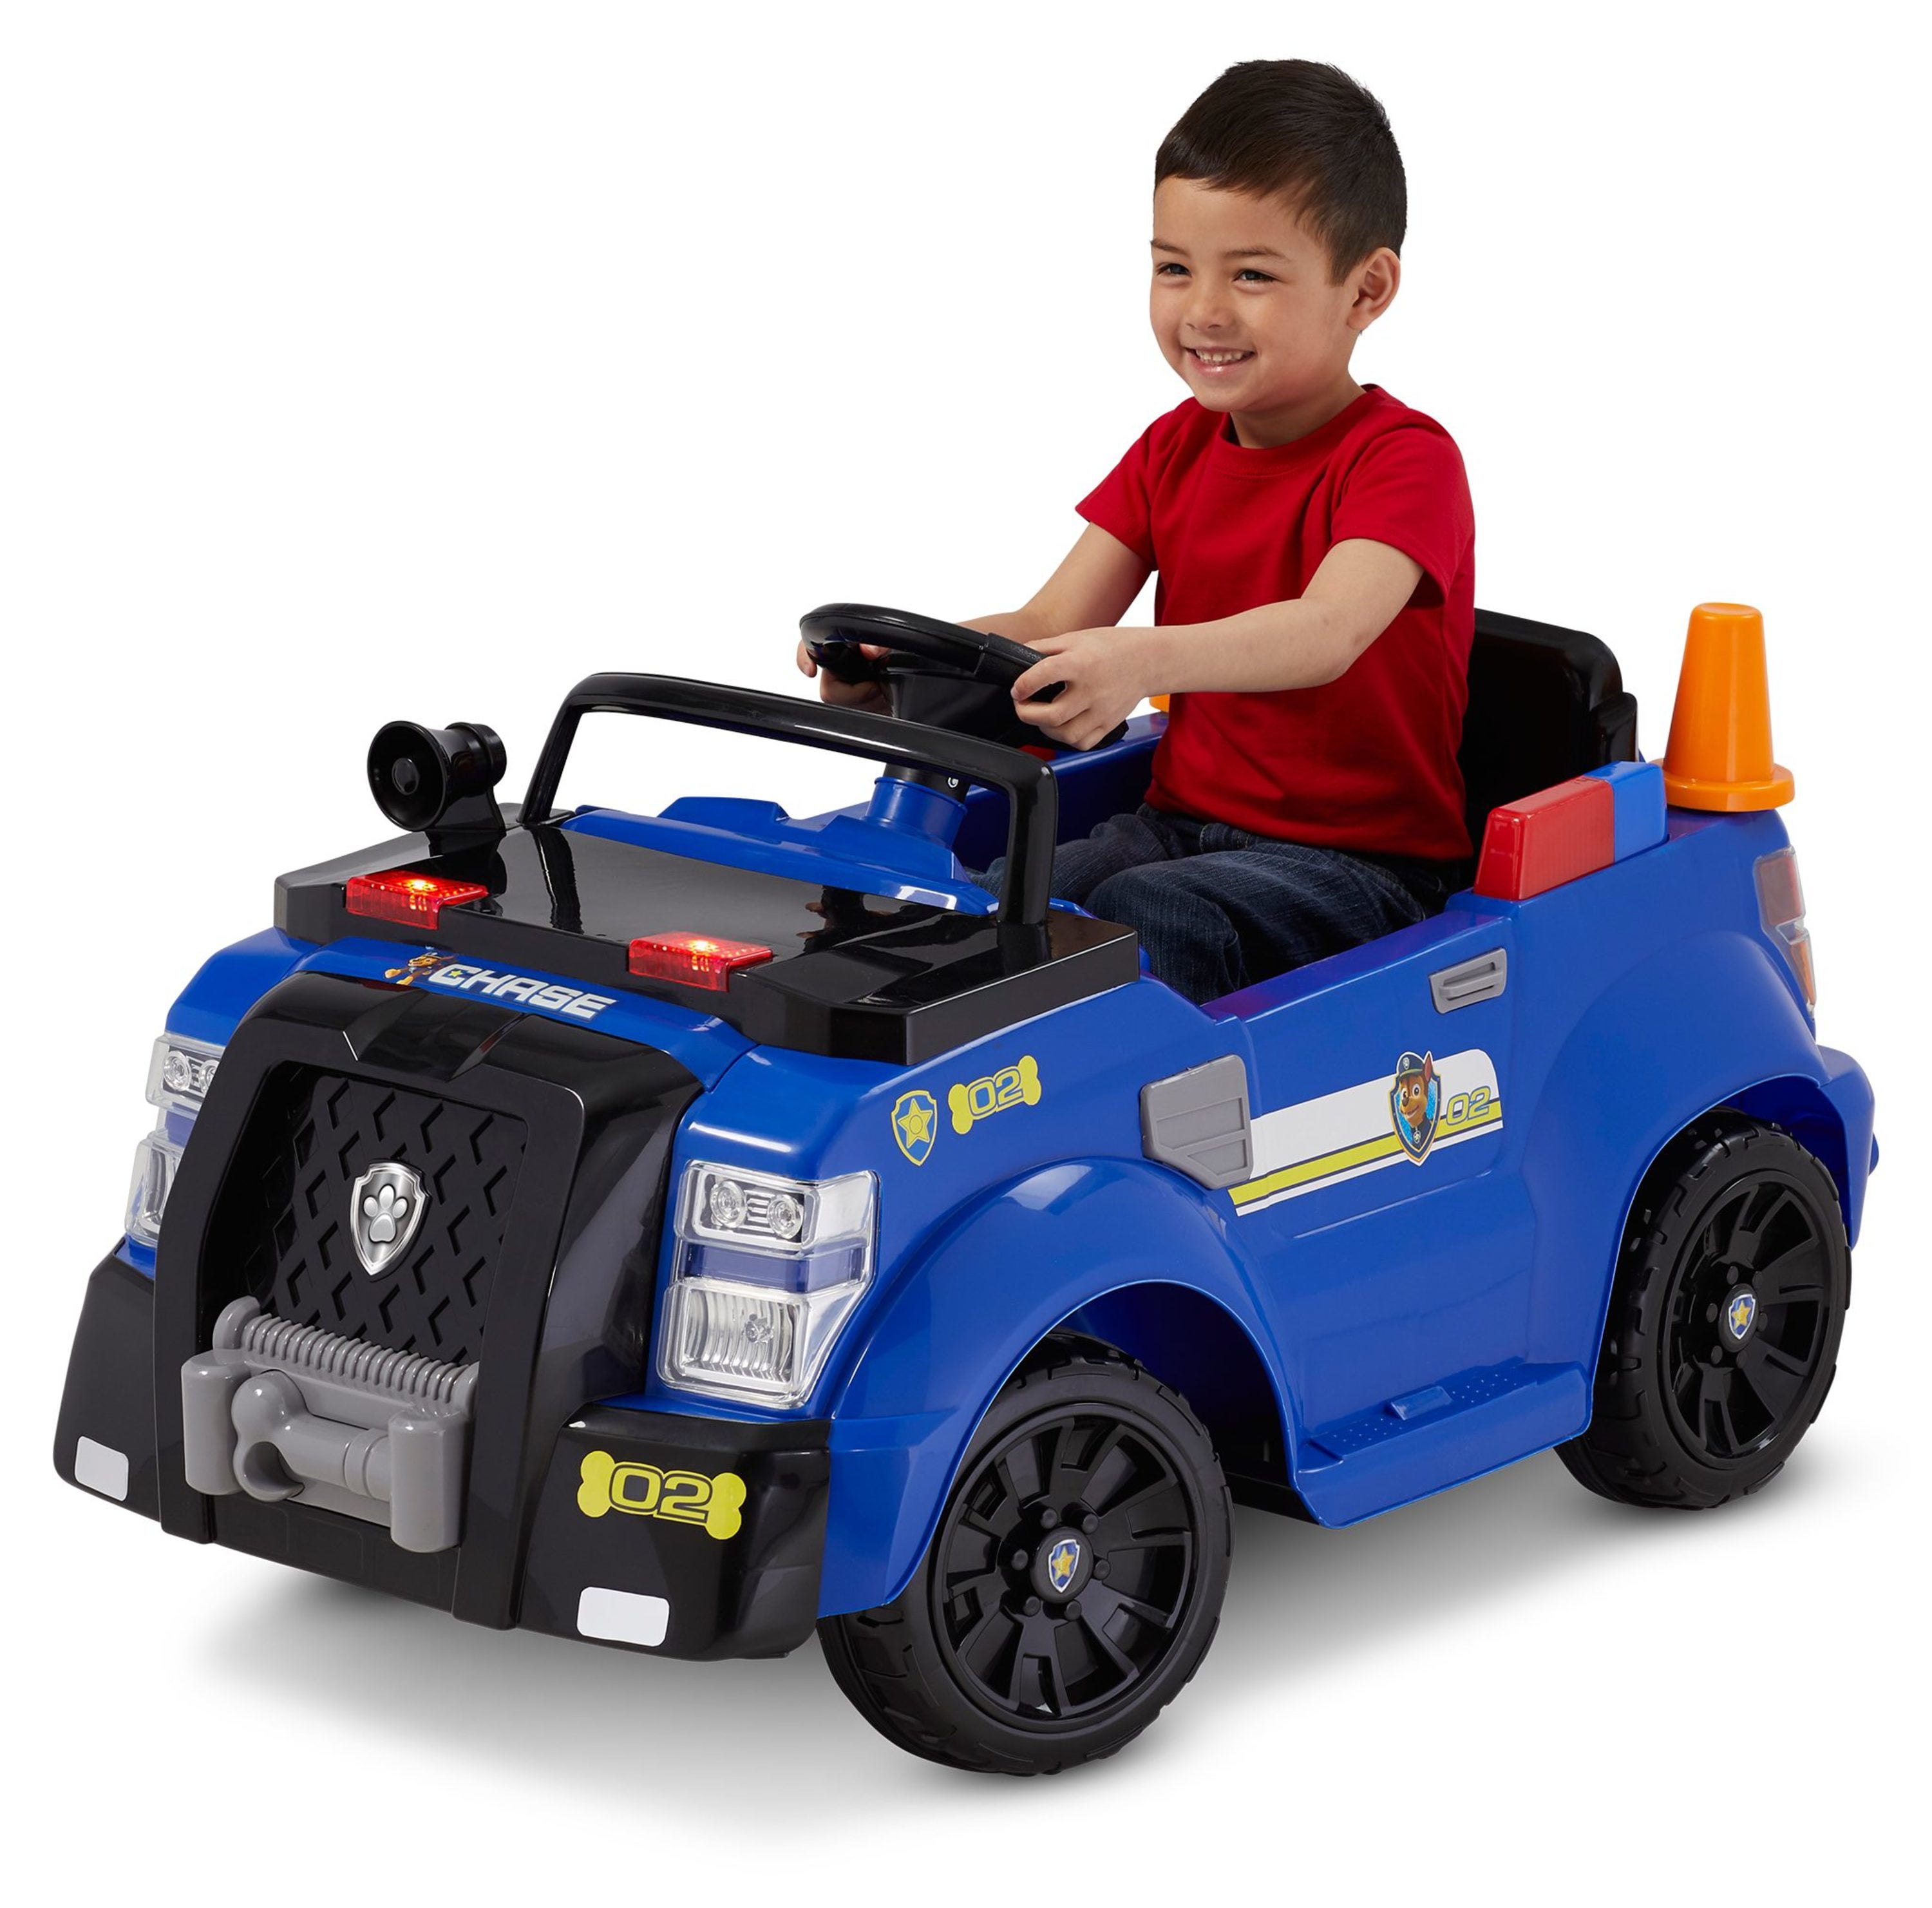 Nickelodeon's PAW Patrol: Chase Police 